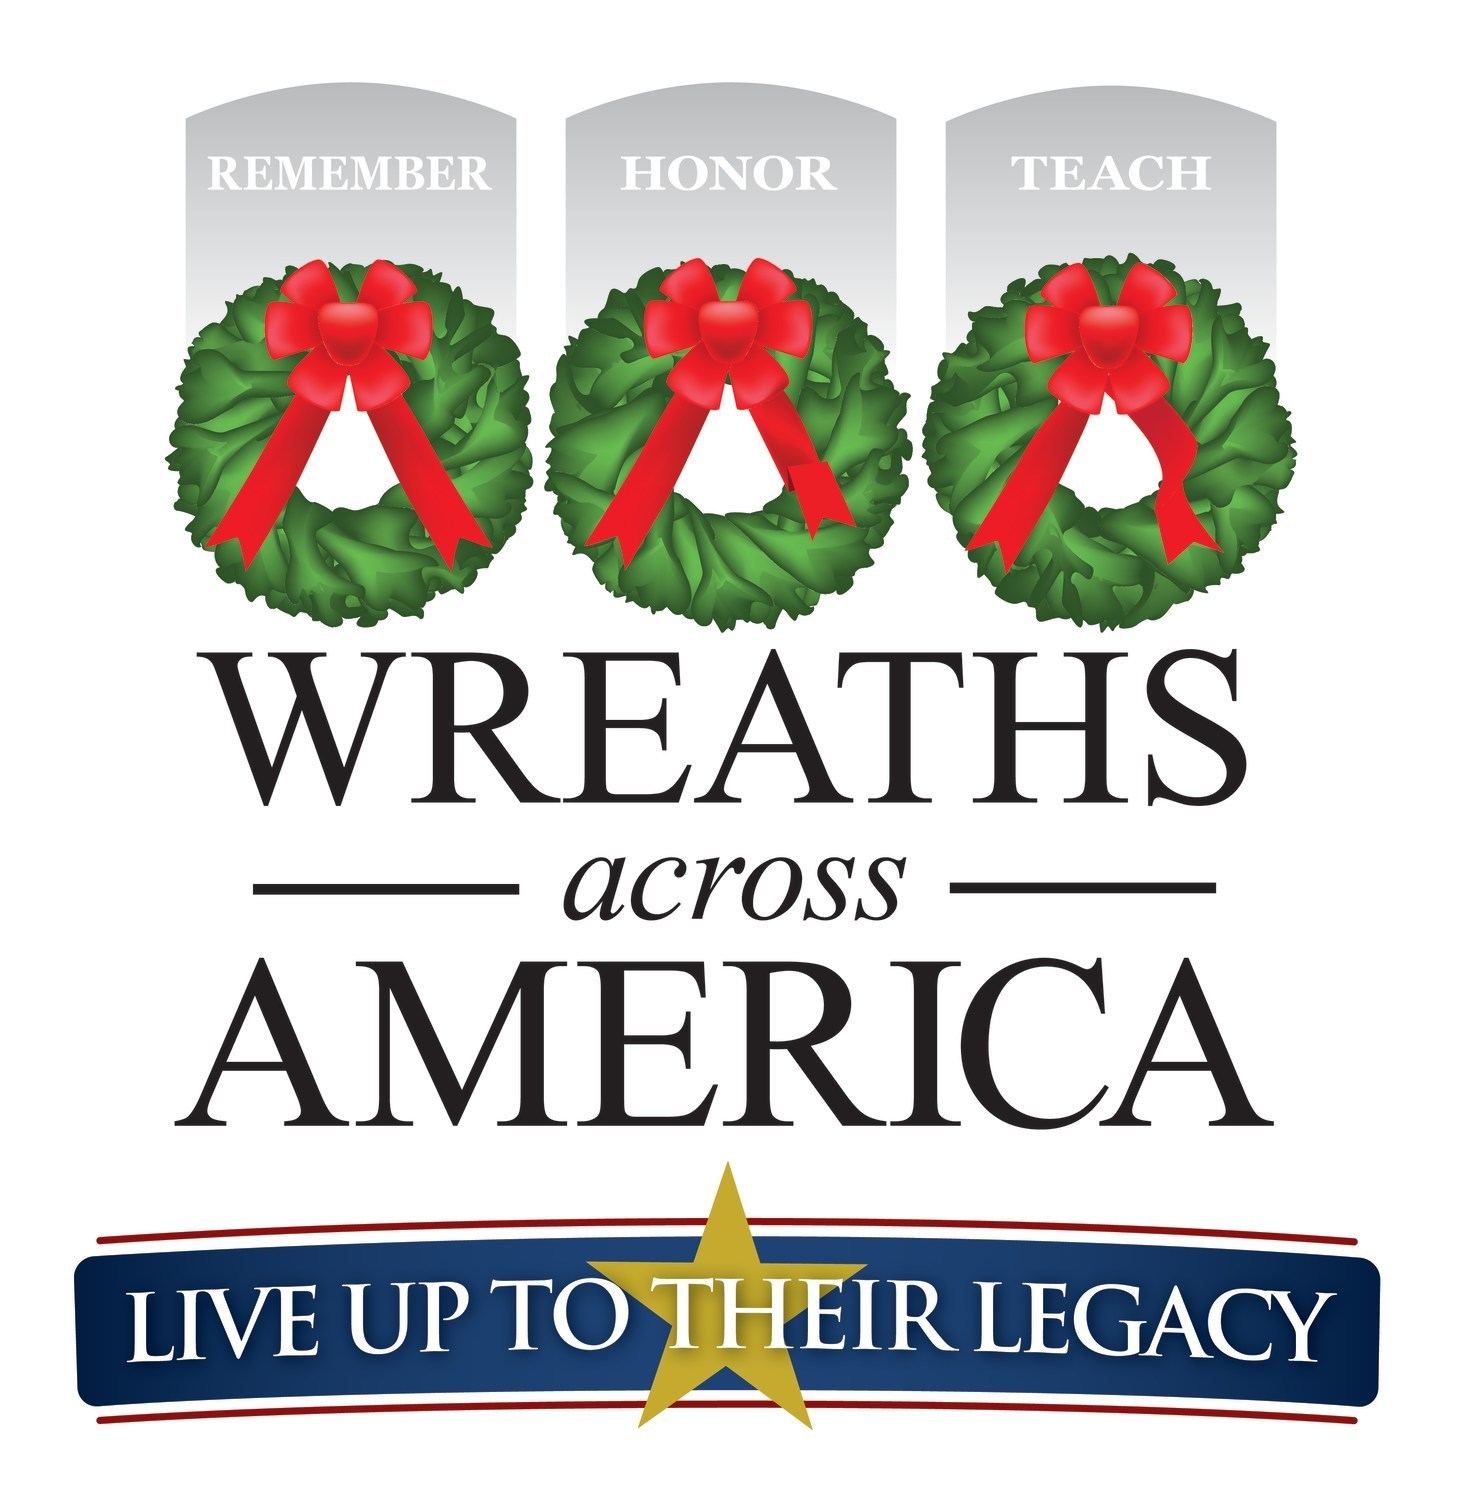 American Pride on Display at this Year's National Wreaths Across